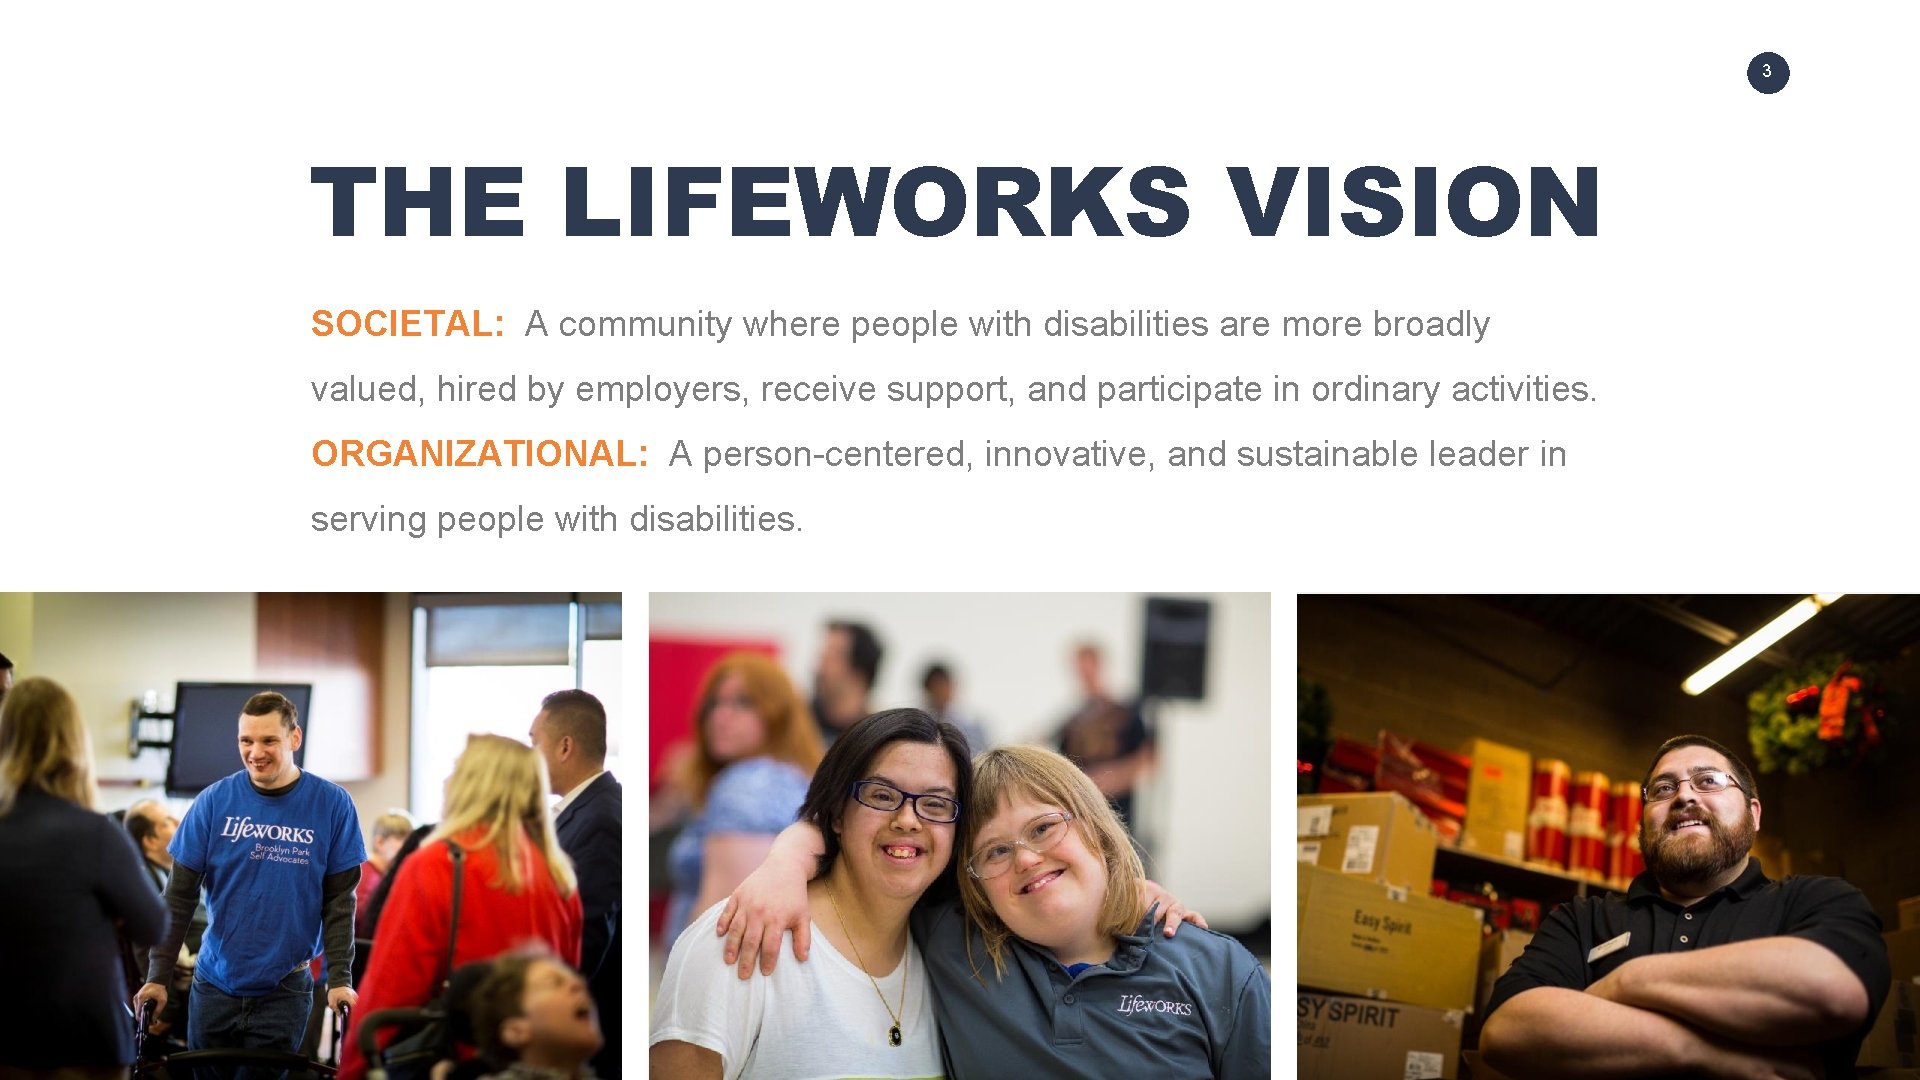 3 THE LIFEWORKS VISION SOCIETAL: A community where people with disabilities are more broadly